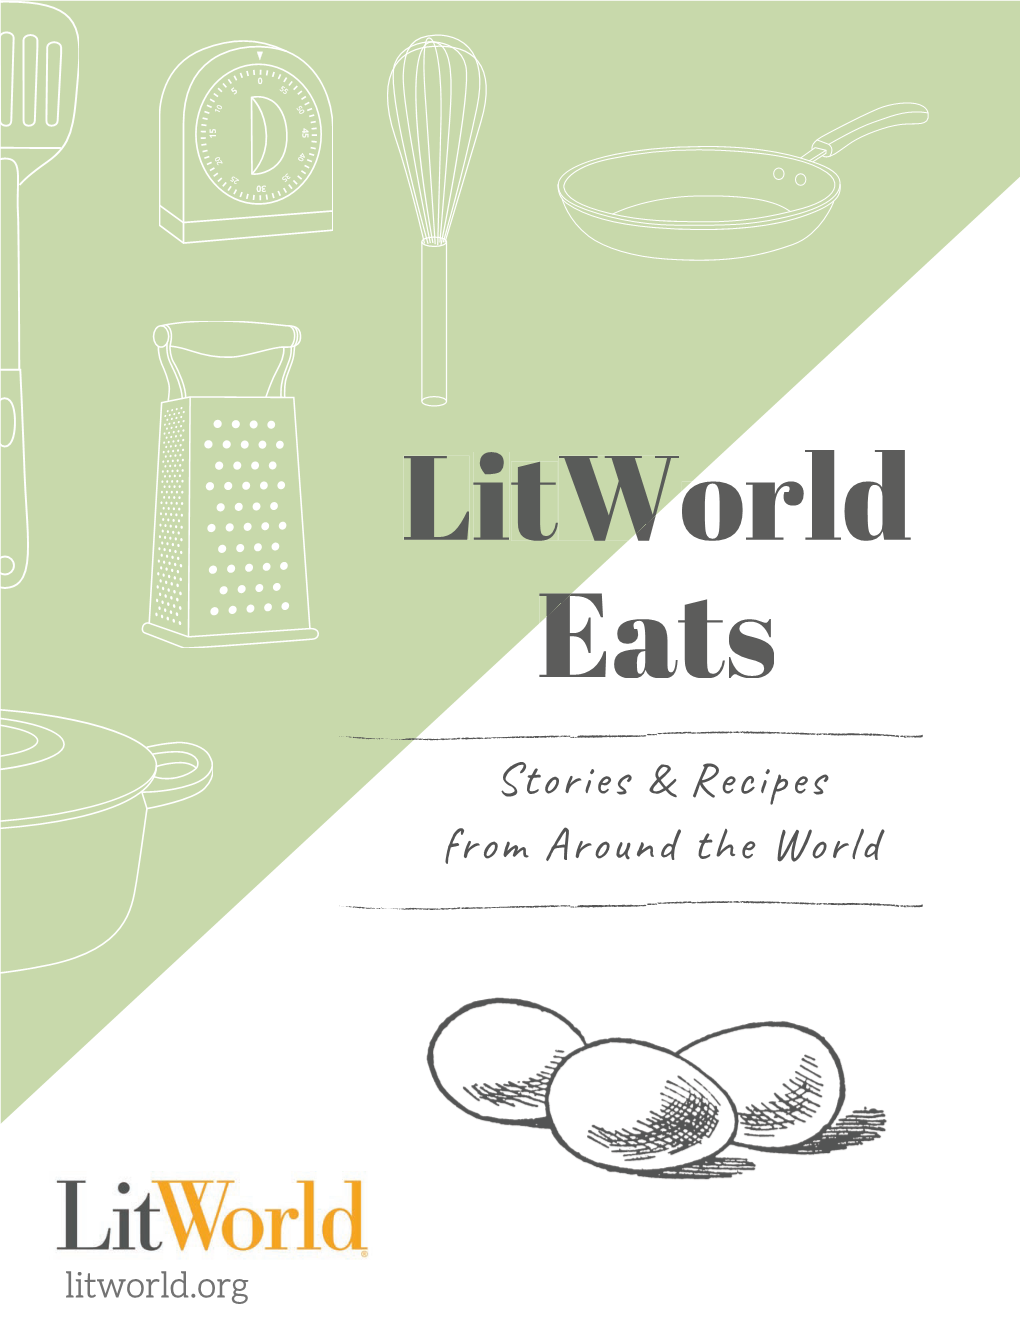 Stories & Recipes from Around the World